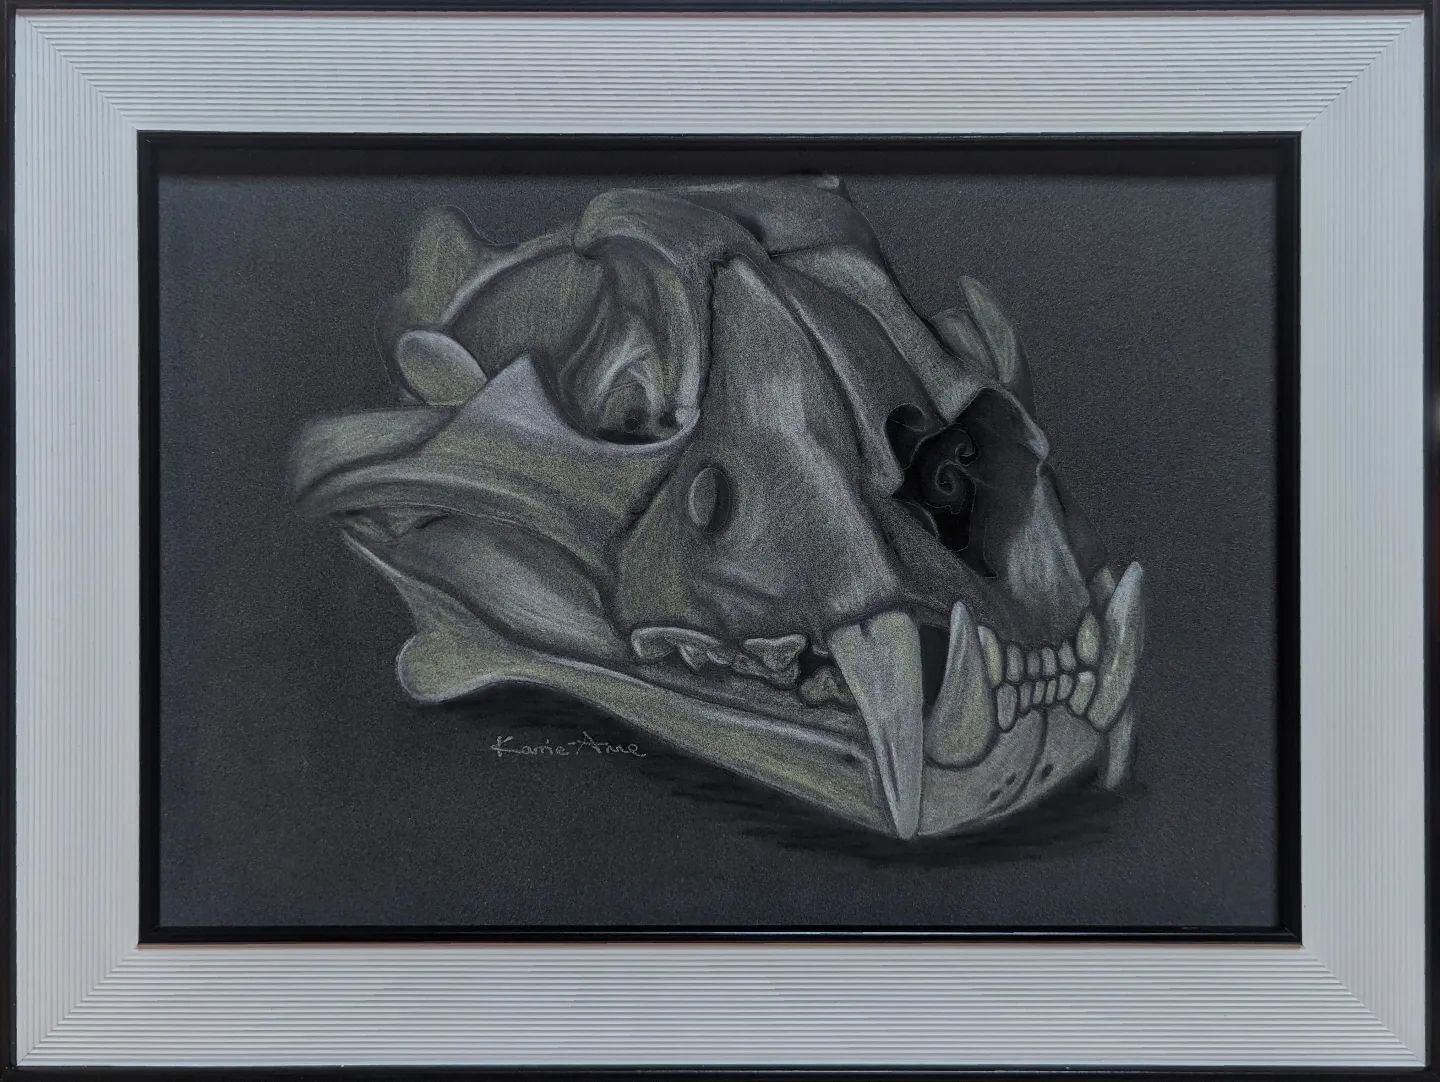 Tiger skull charcoal and pastel sketch. Using a long time favourite @derwentartofficial pastel and charcoal pencils.

#charcoalandpastel #skull #charcoalsketch #lincolnshireartish #tiger #sketch